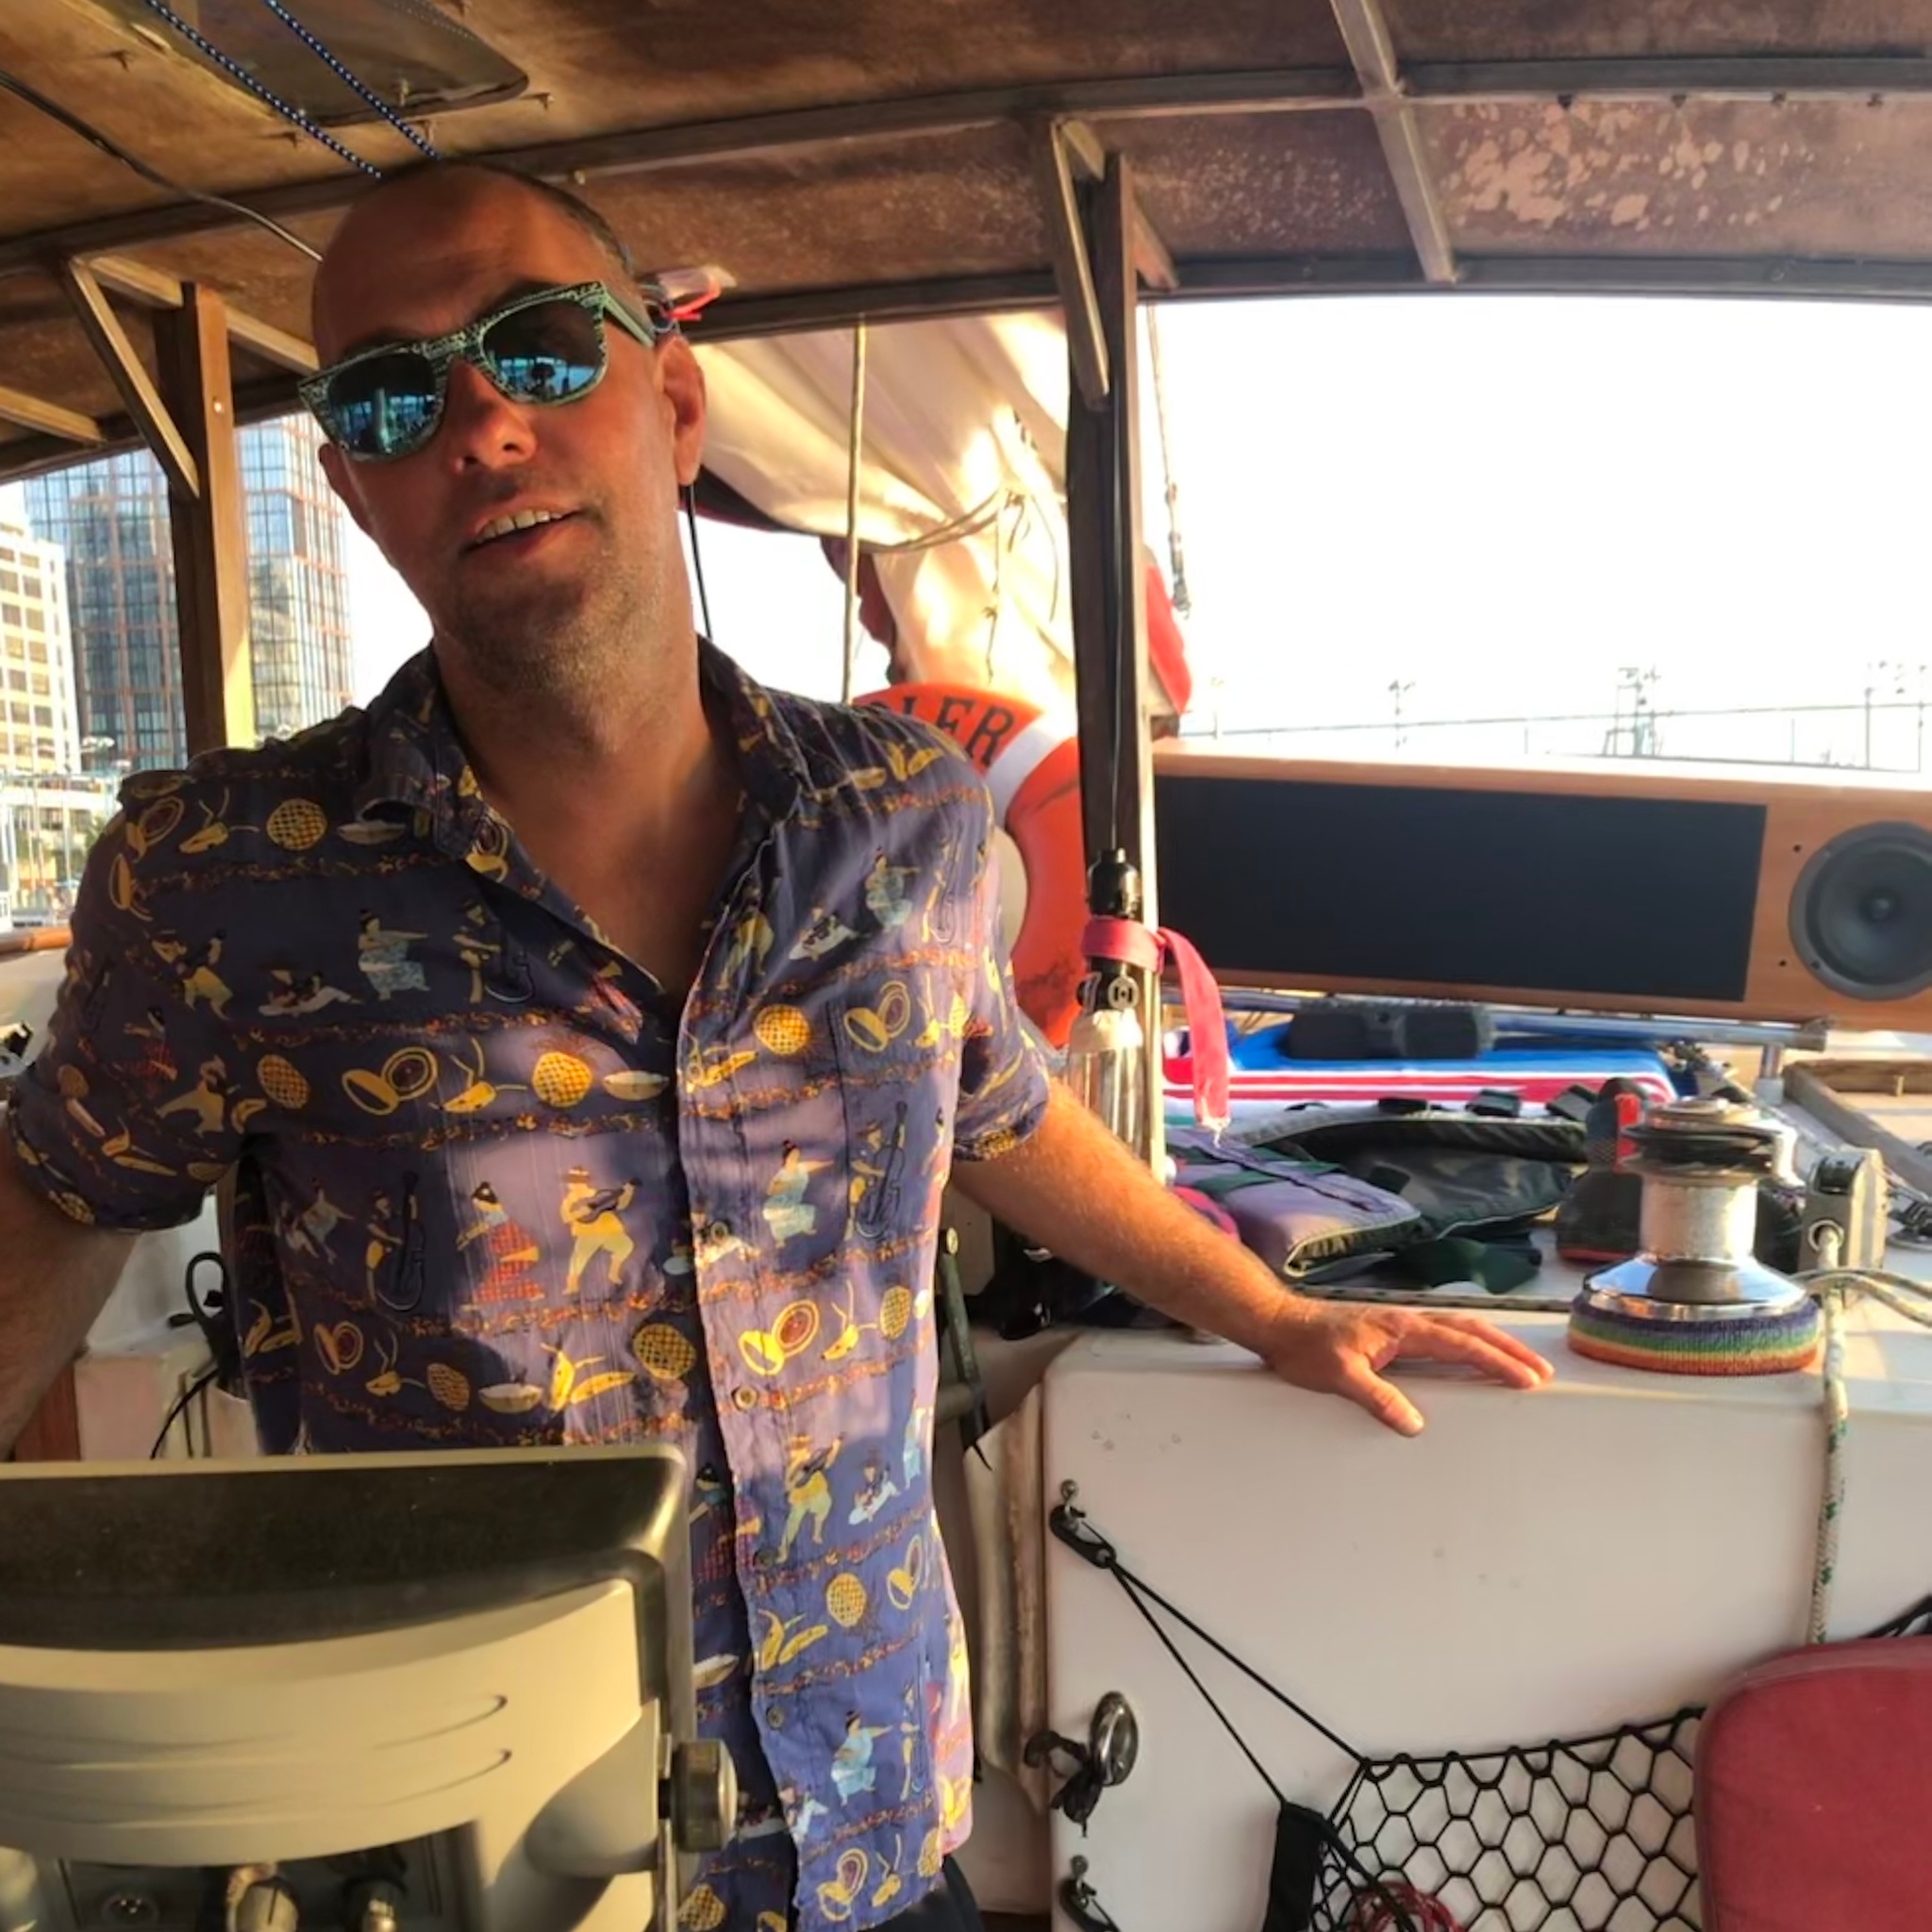 A man stands in sunglasses and a shirt with a colorful, cartoonish print within a sail boat